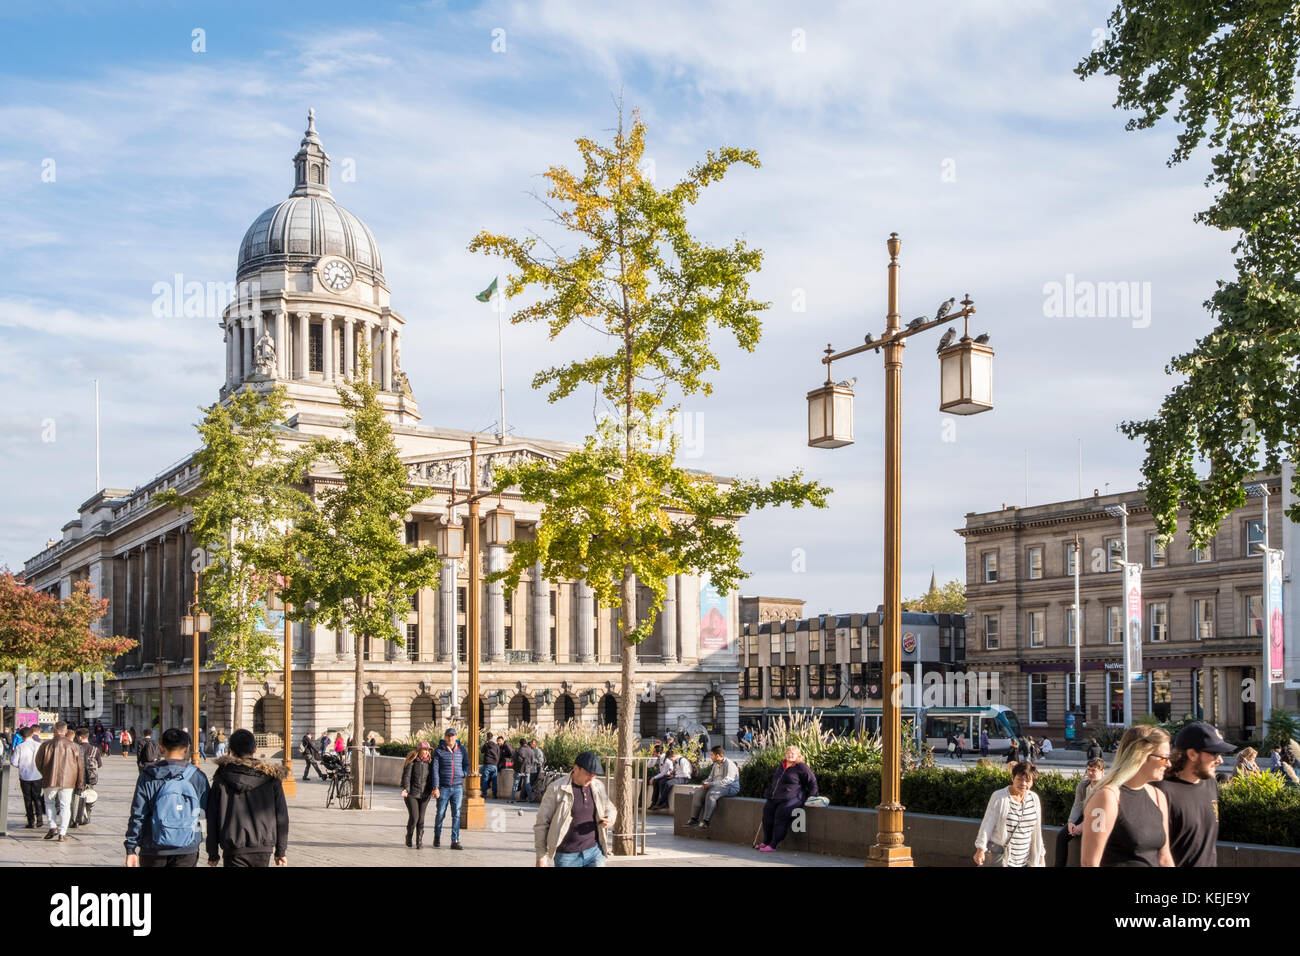 Council House and the Old Market Square, Nottingham city centre, England, UK Stock Photo